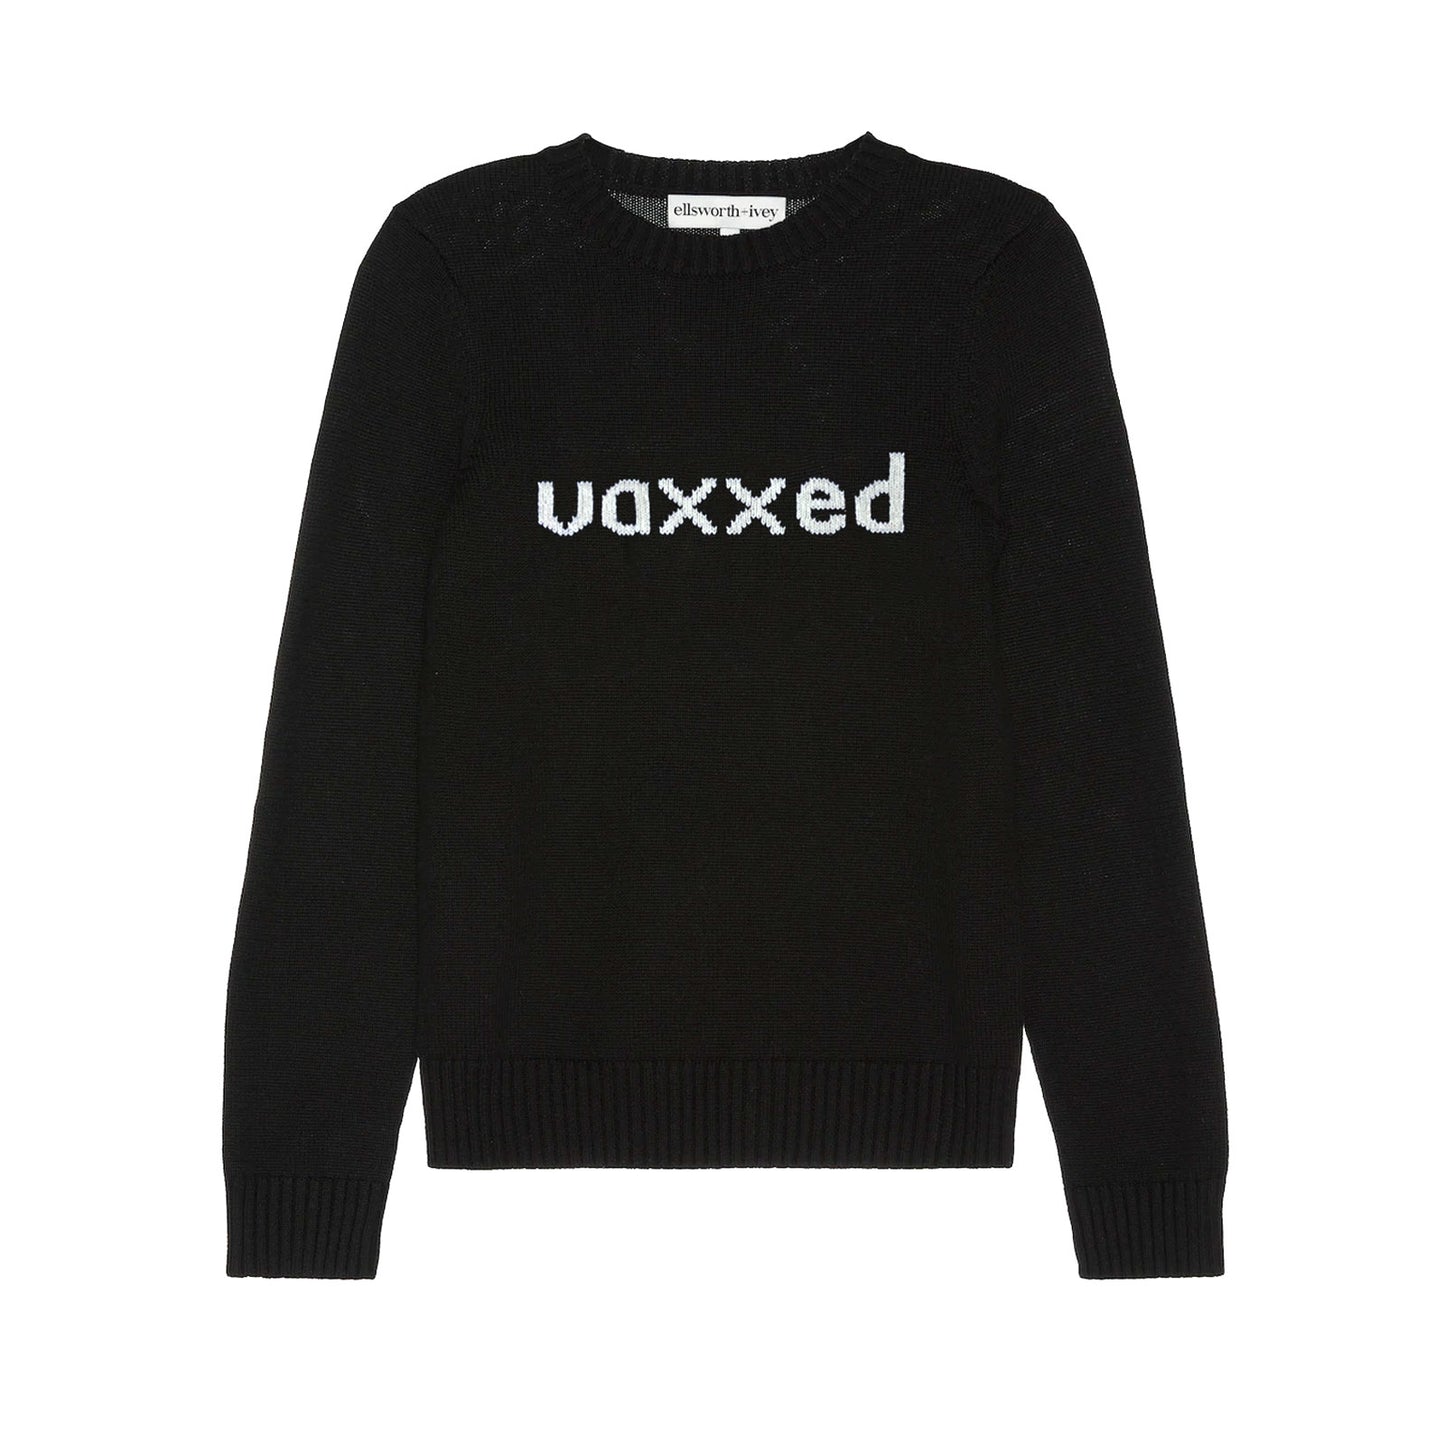 Exclusive Vaxxed Sweater, Black / Ivory